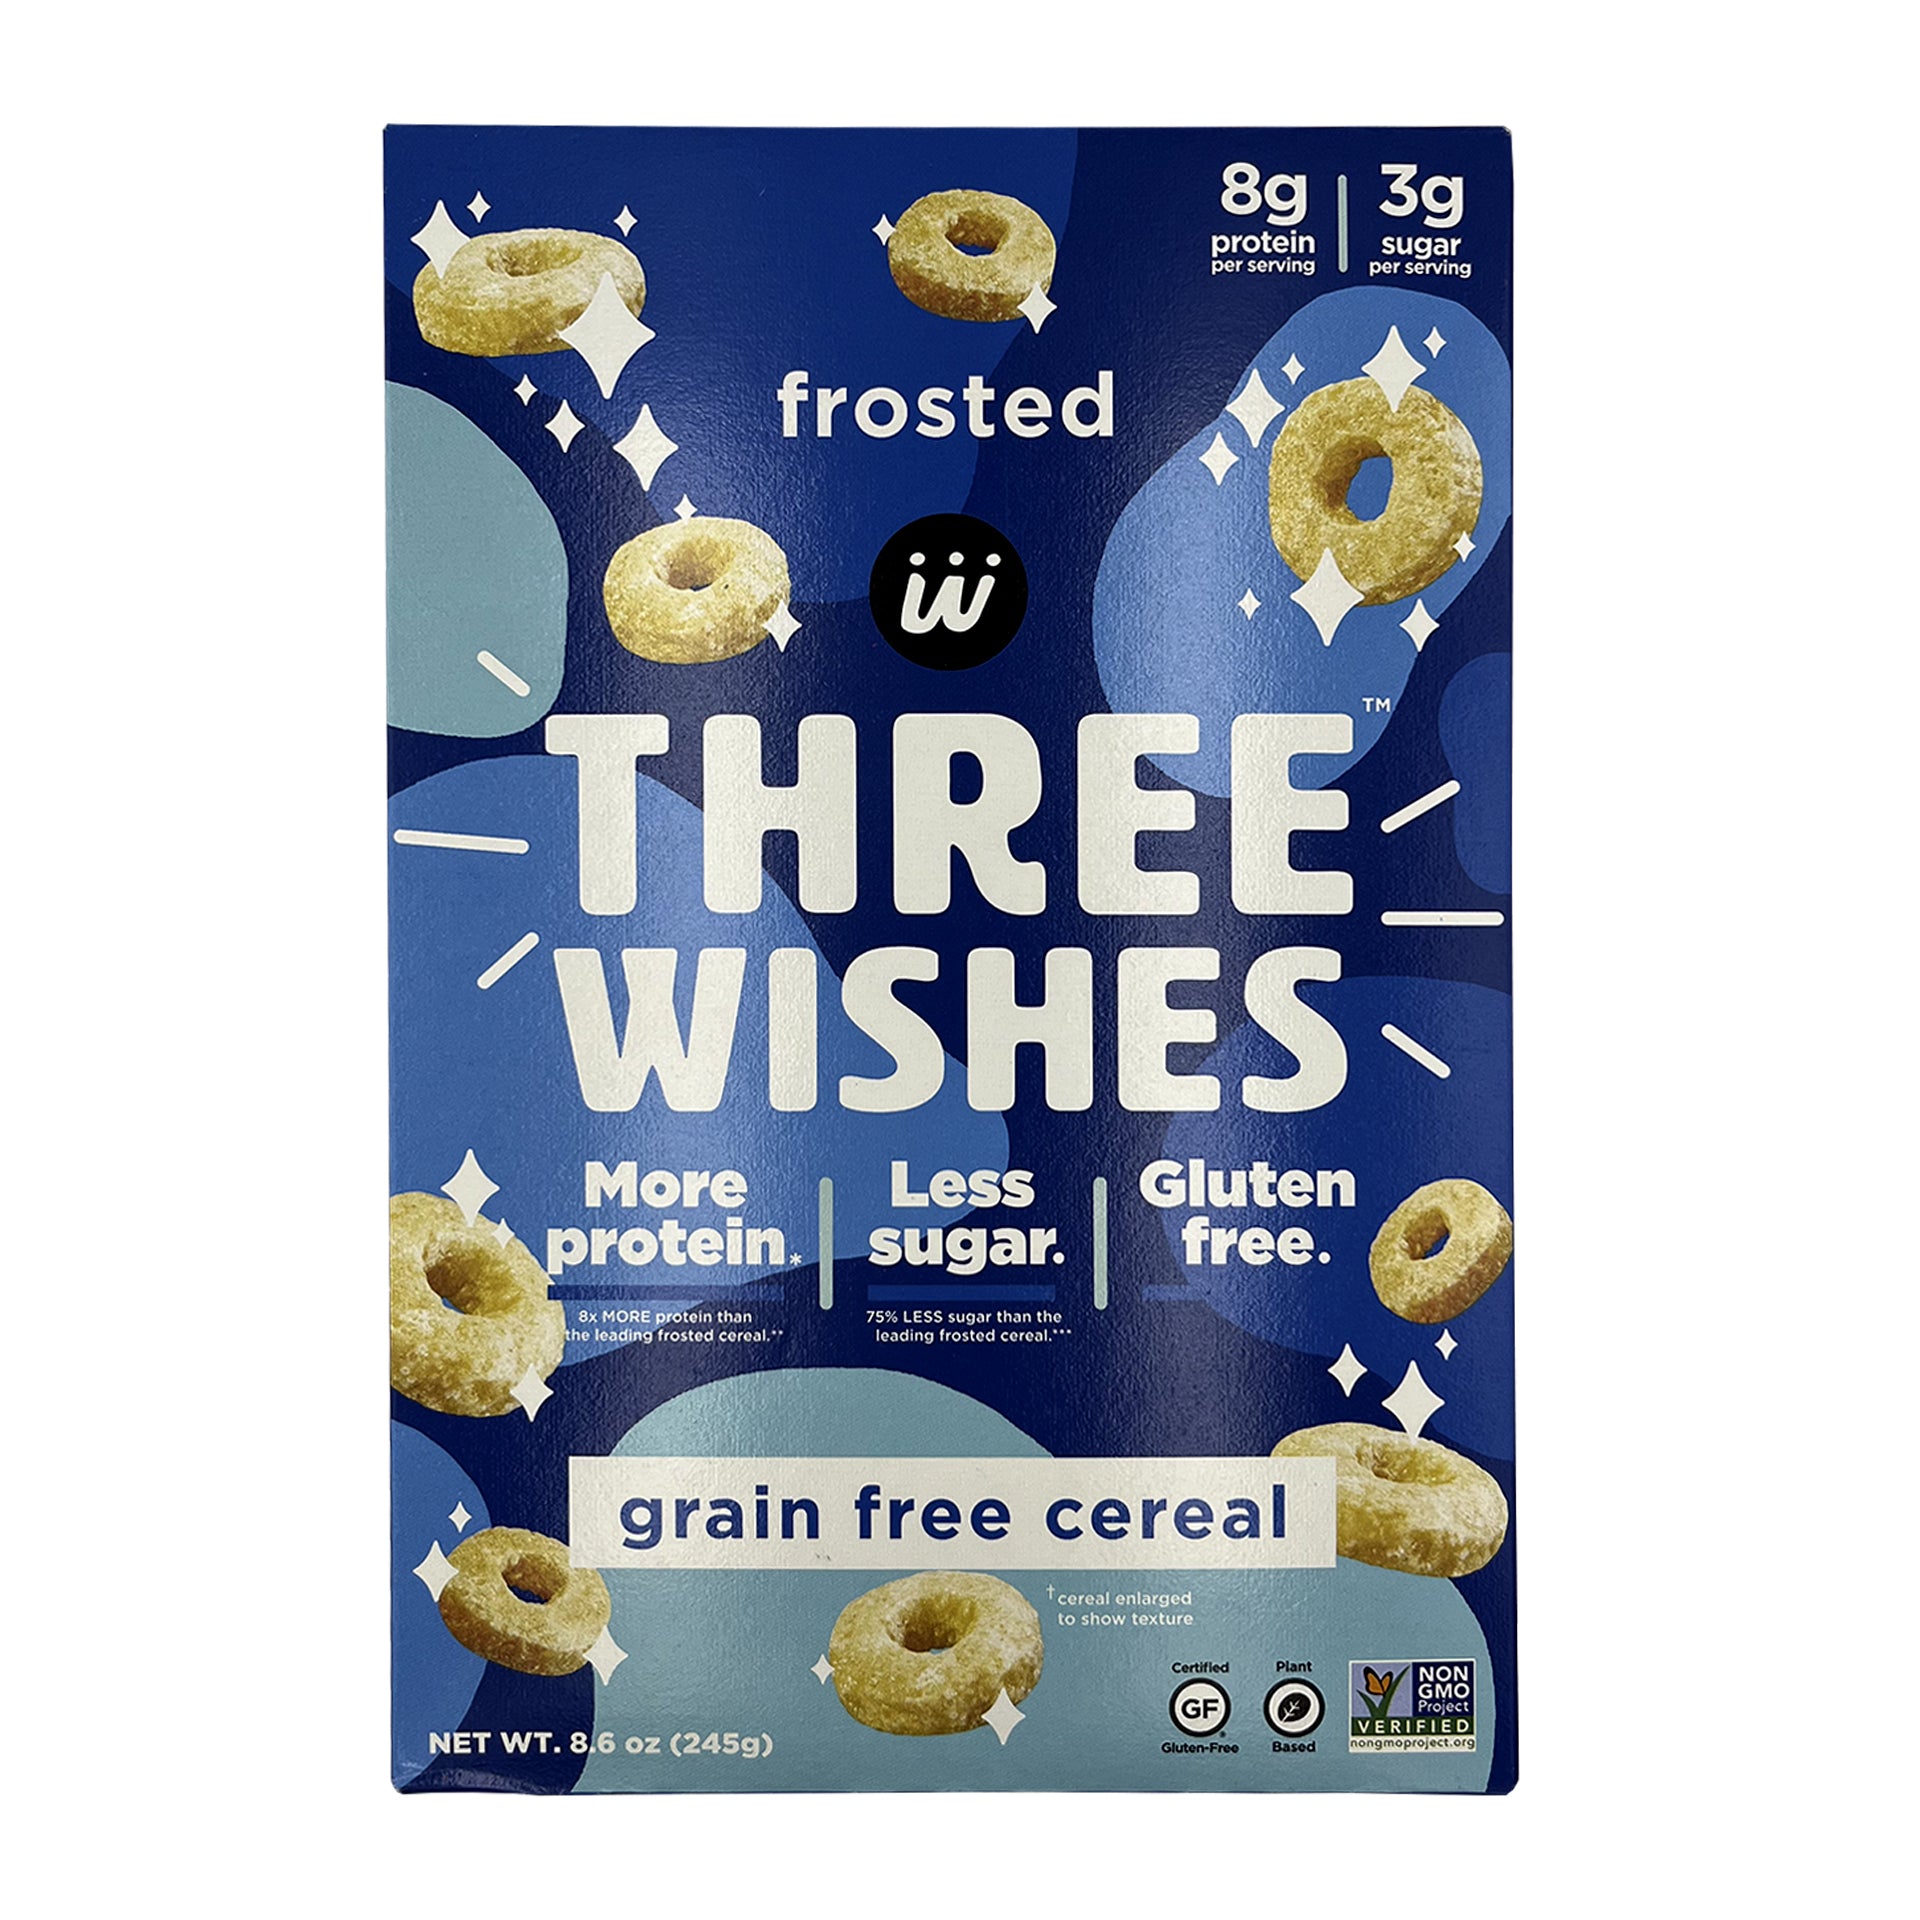 Three Wishes Cereal Review - My Life After Dairy